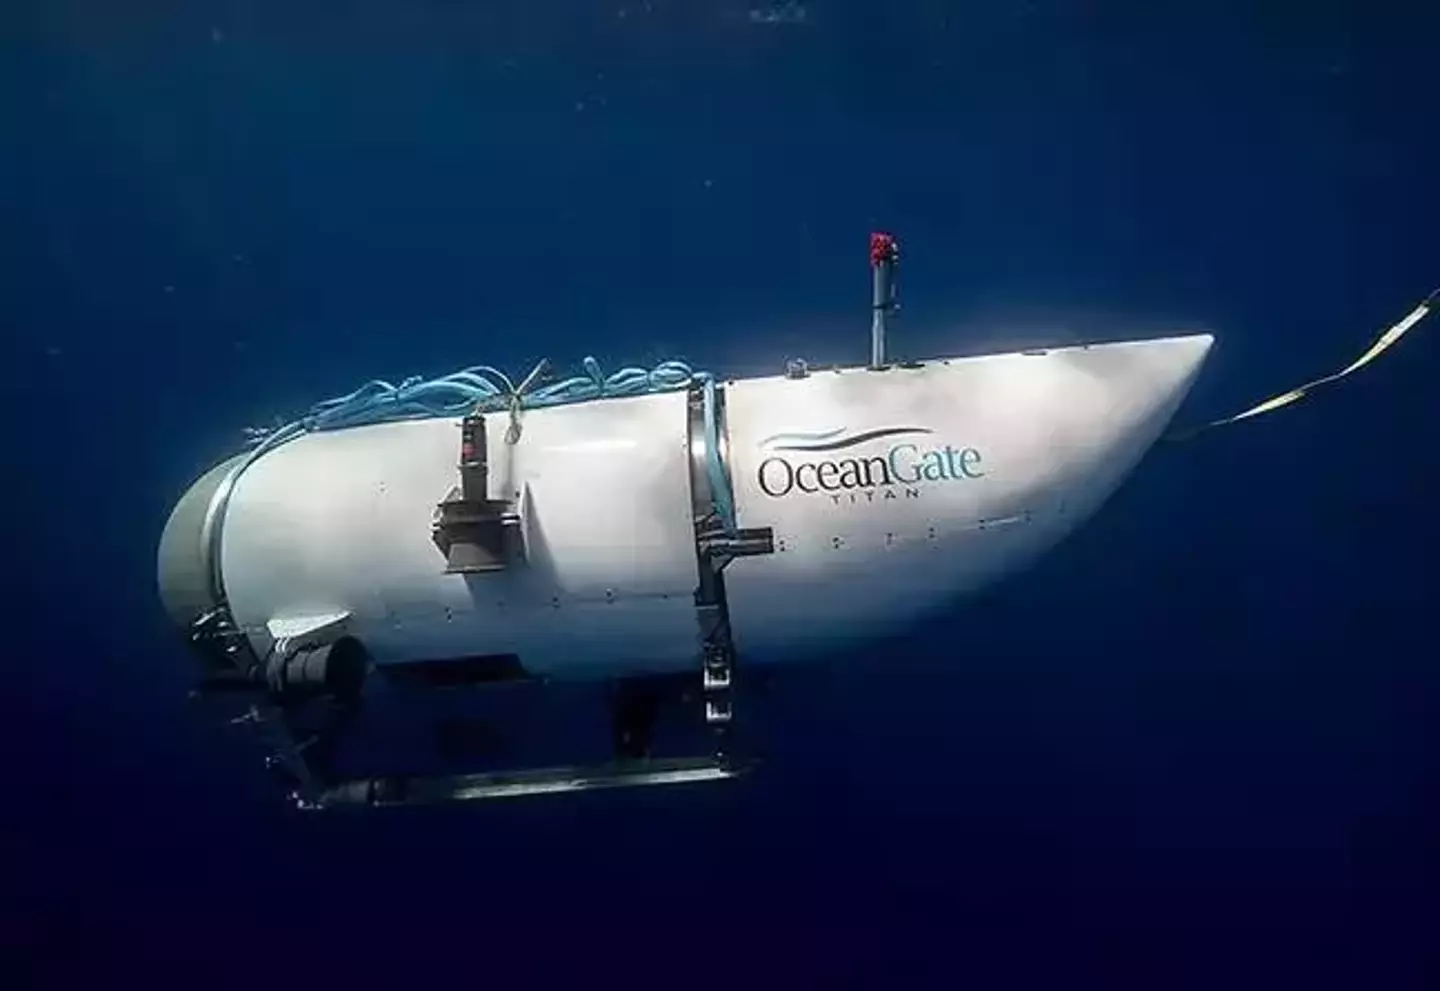 Brian Weed went aboard the Titan submersible in 2021 and said it experienced systems failures only about 100ft underwater.